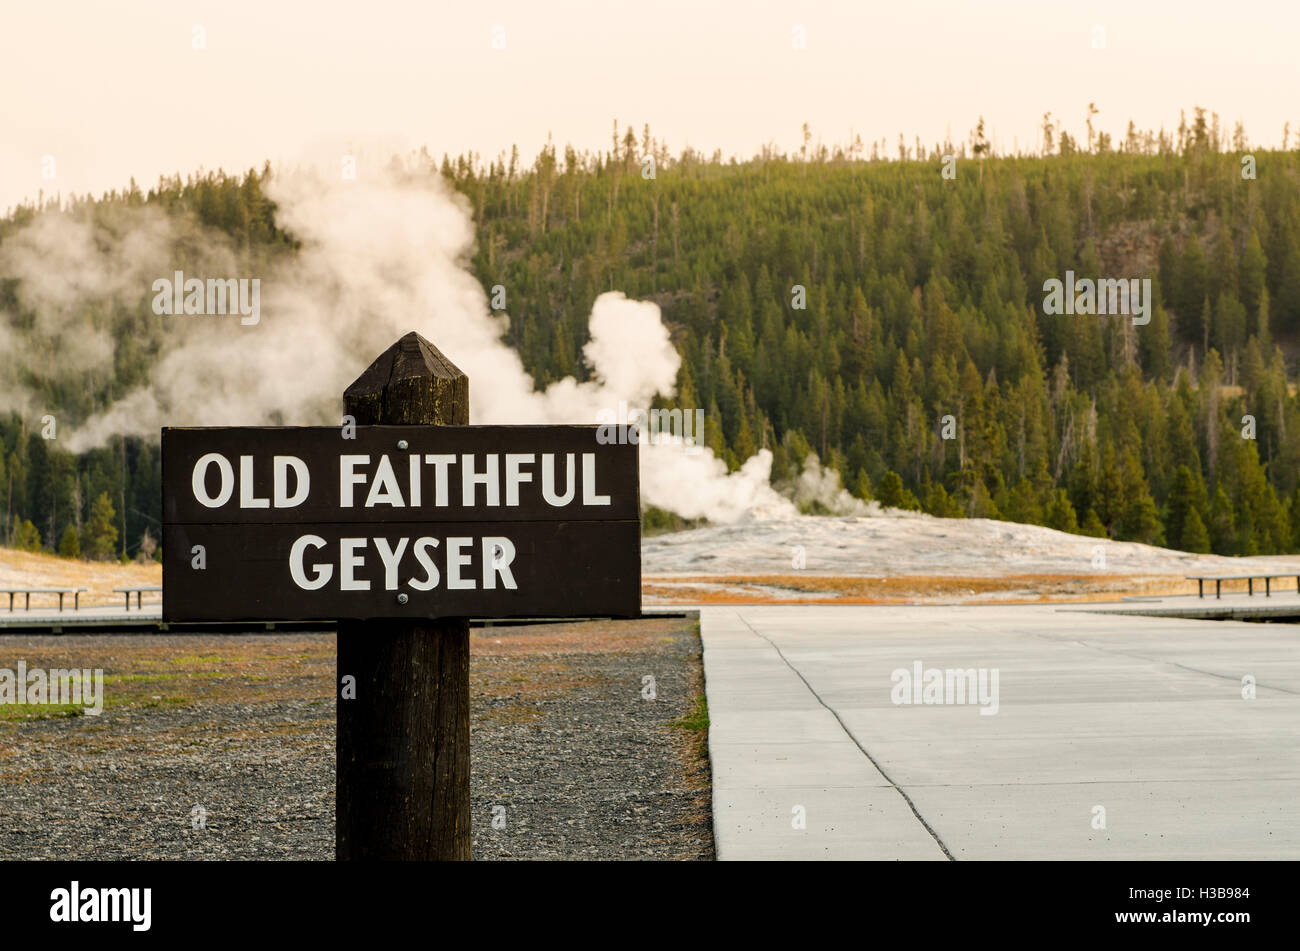 Upper geyser Old Faithful Geyser Basin, Parc National de Yellowstone, Wyoming, USA. Banque D'Images